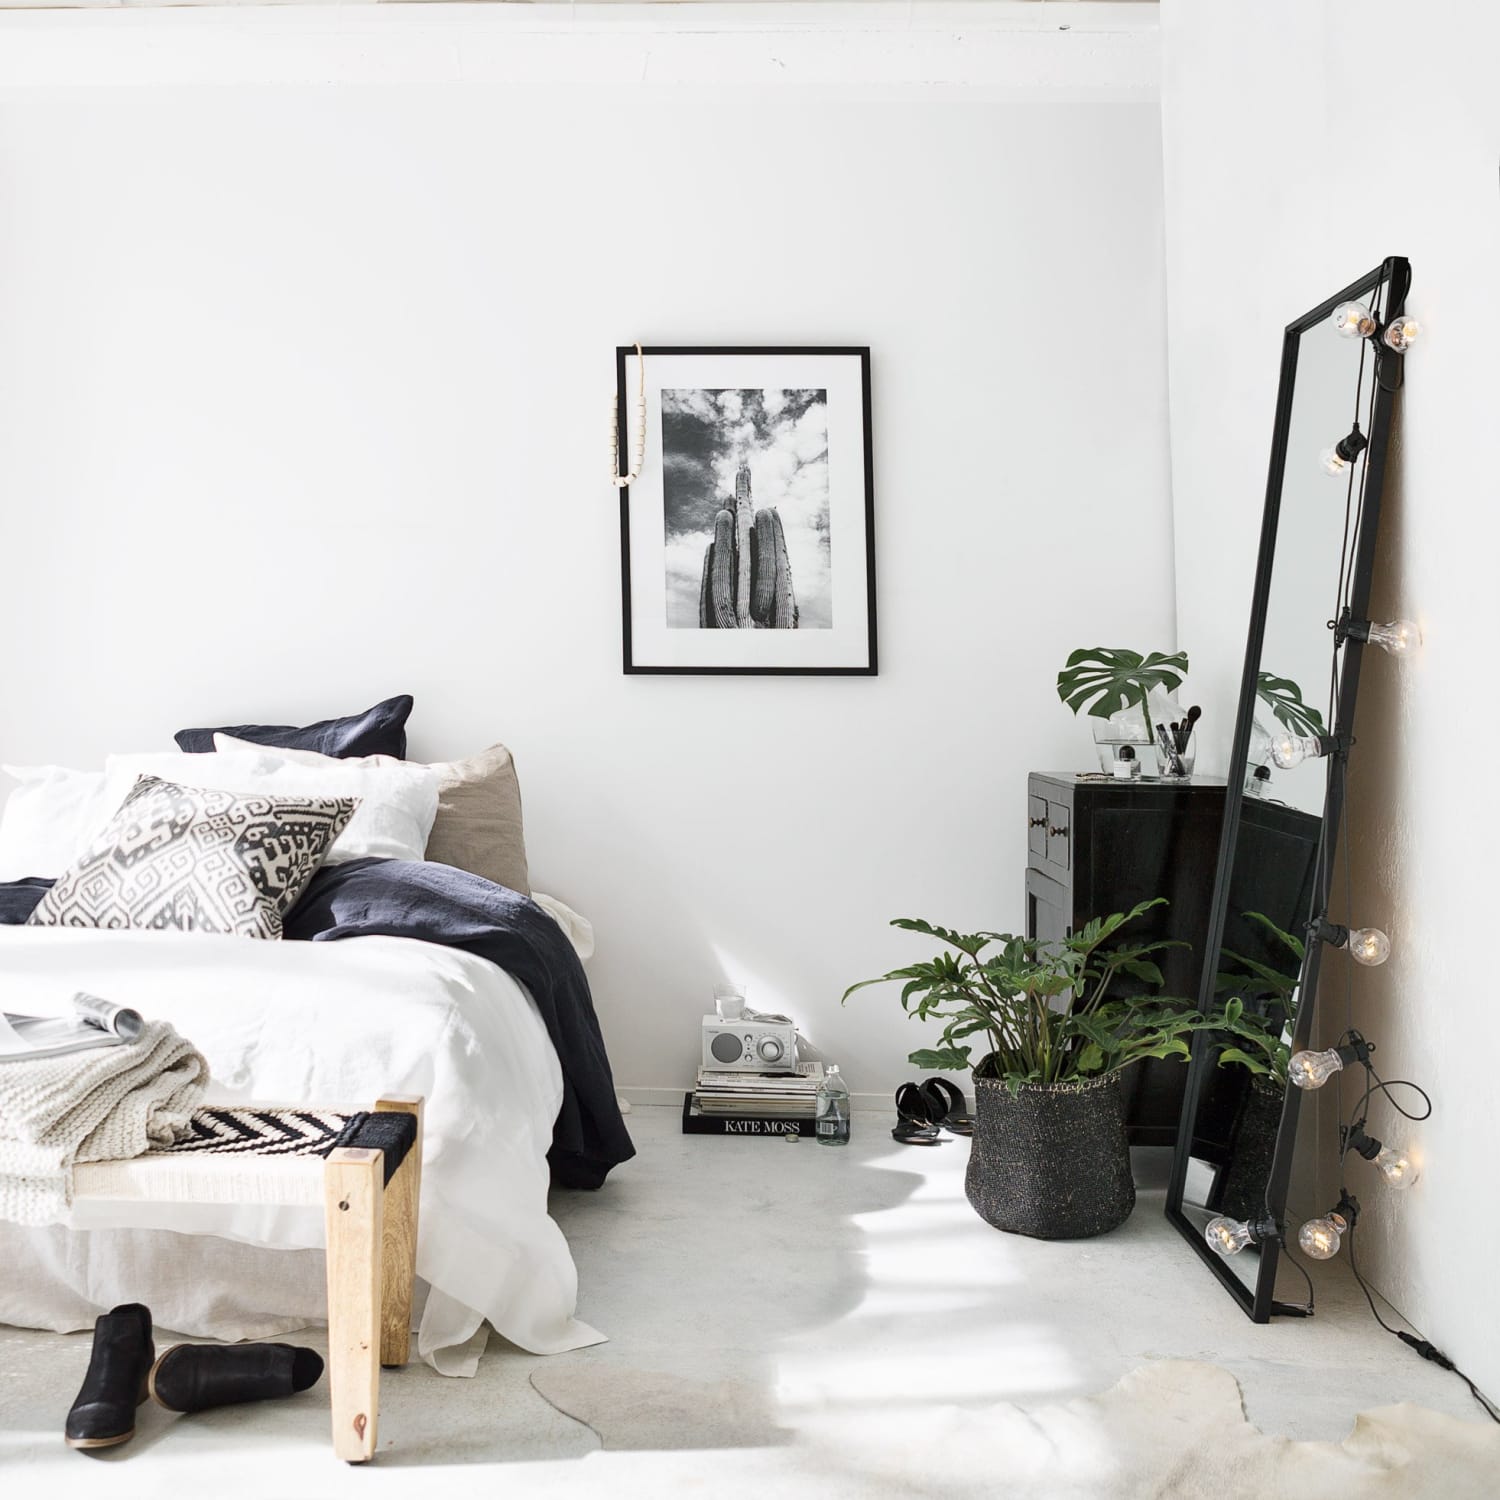 28 Ways to Use Those Magical String Apartment